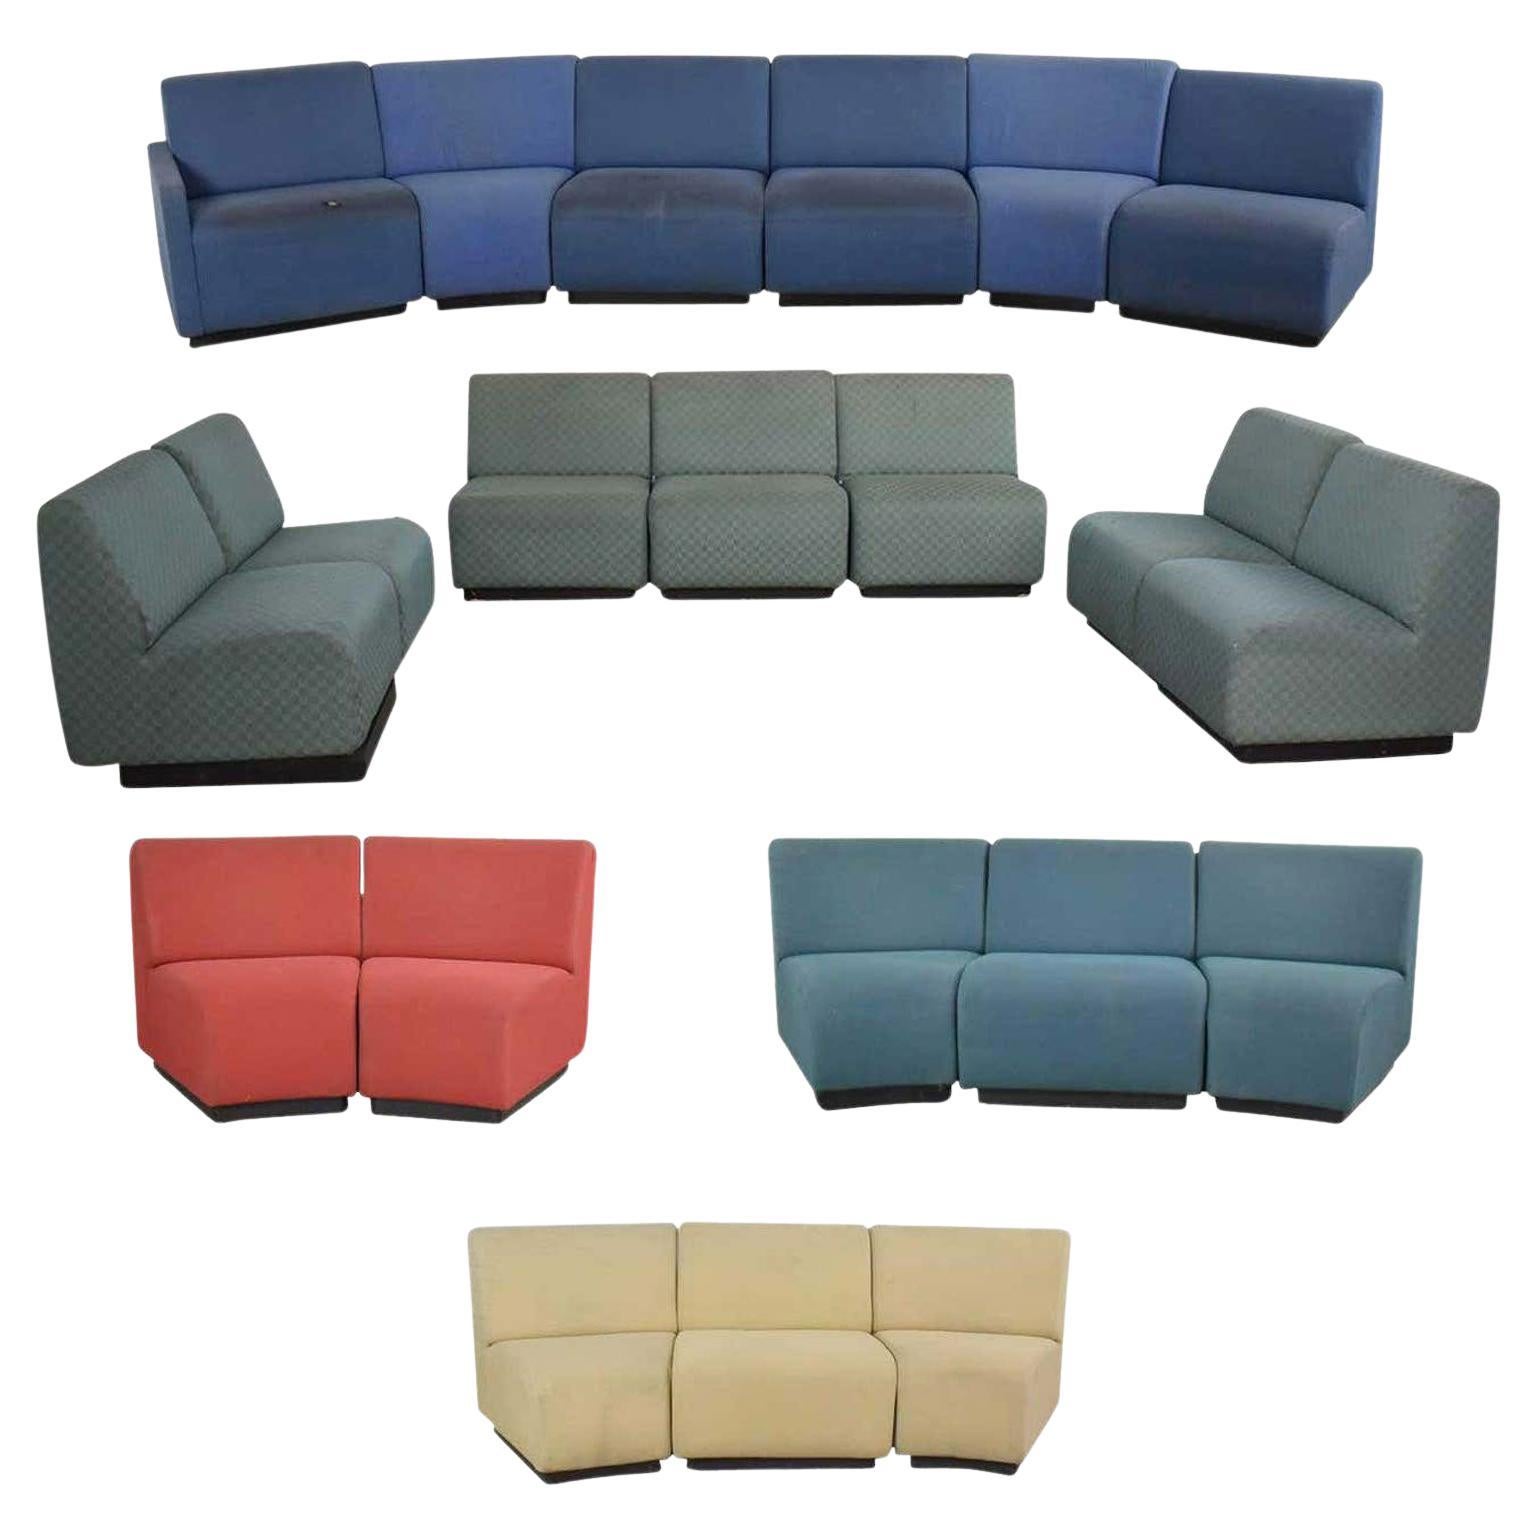 August Inc Modern Modular Sectional Sofa Straight & Wedge Pieces Style Chadwick